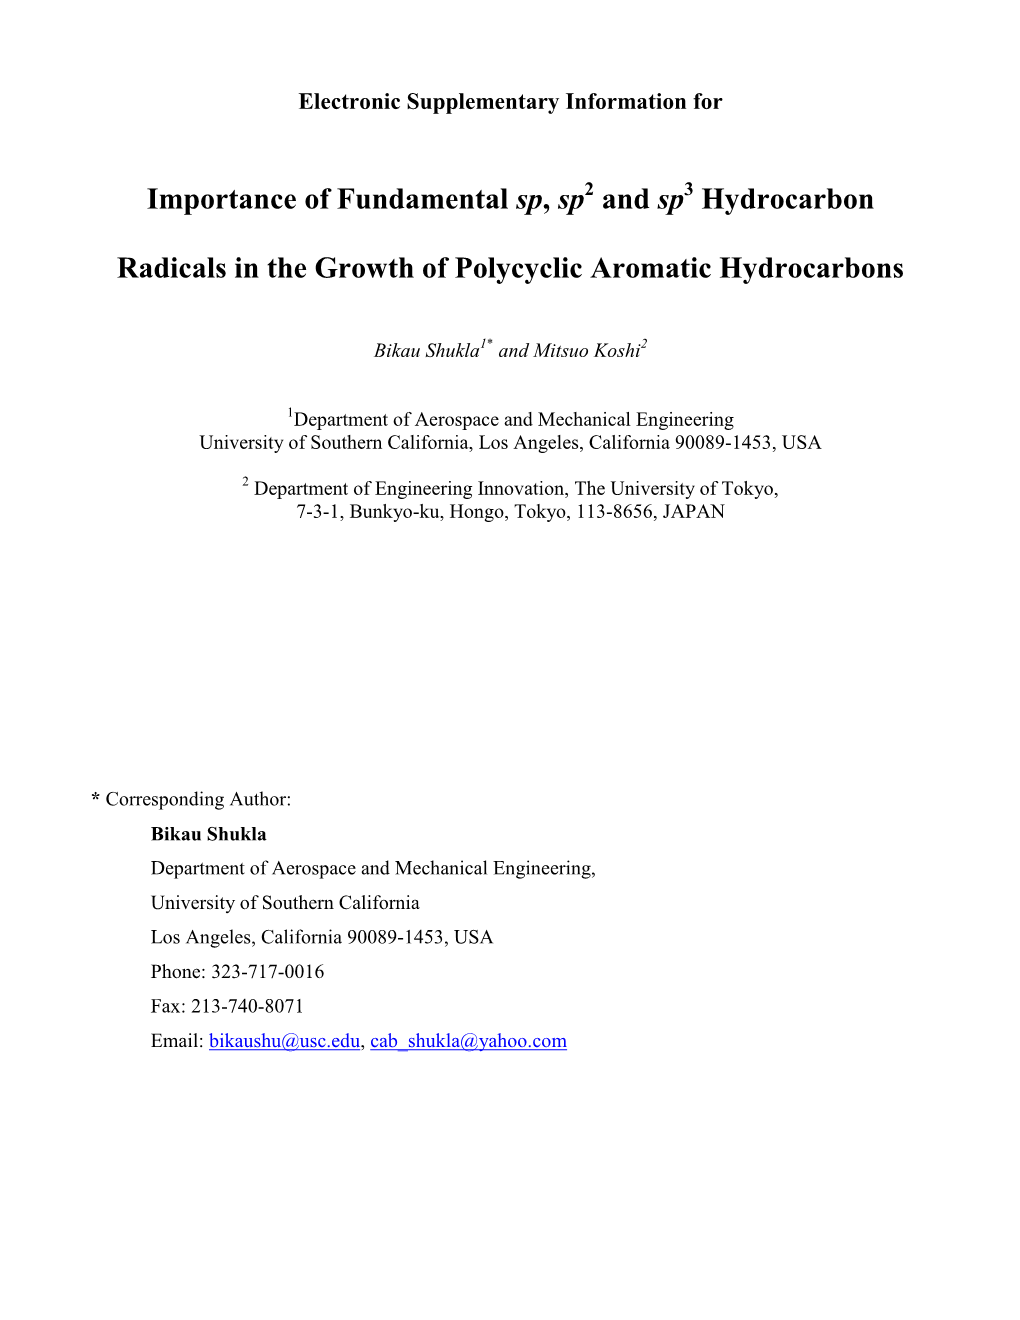 Importance of Fundamental Sp, Sp and Sp Hydrocarbon Radicals in The